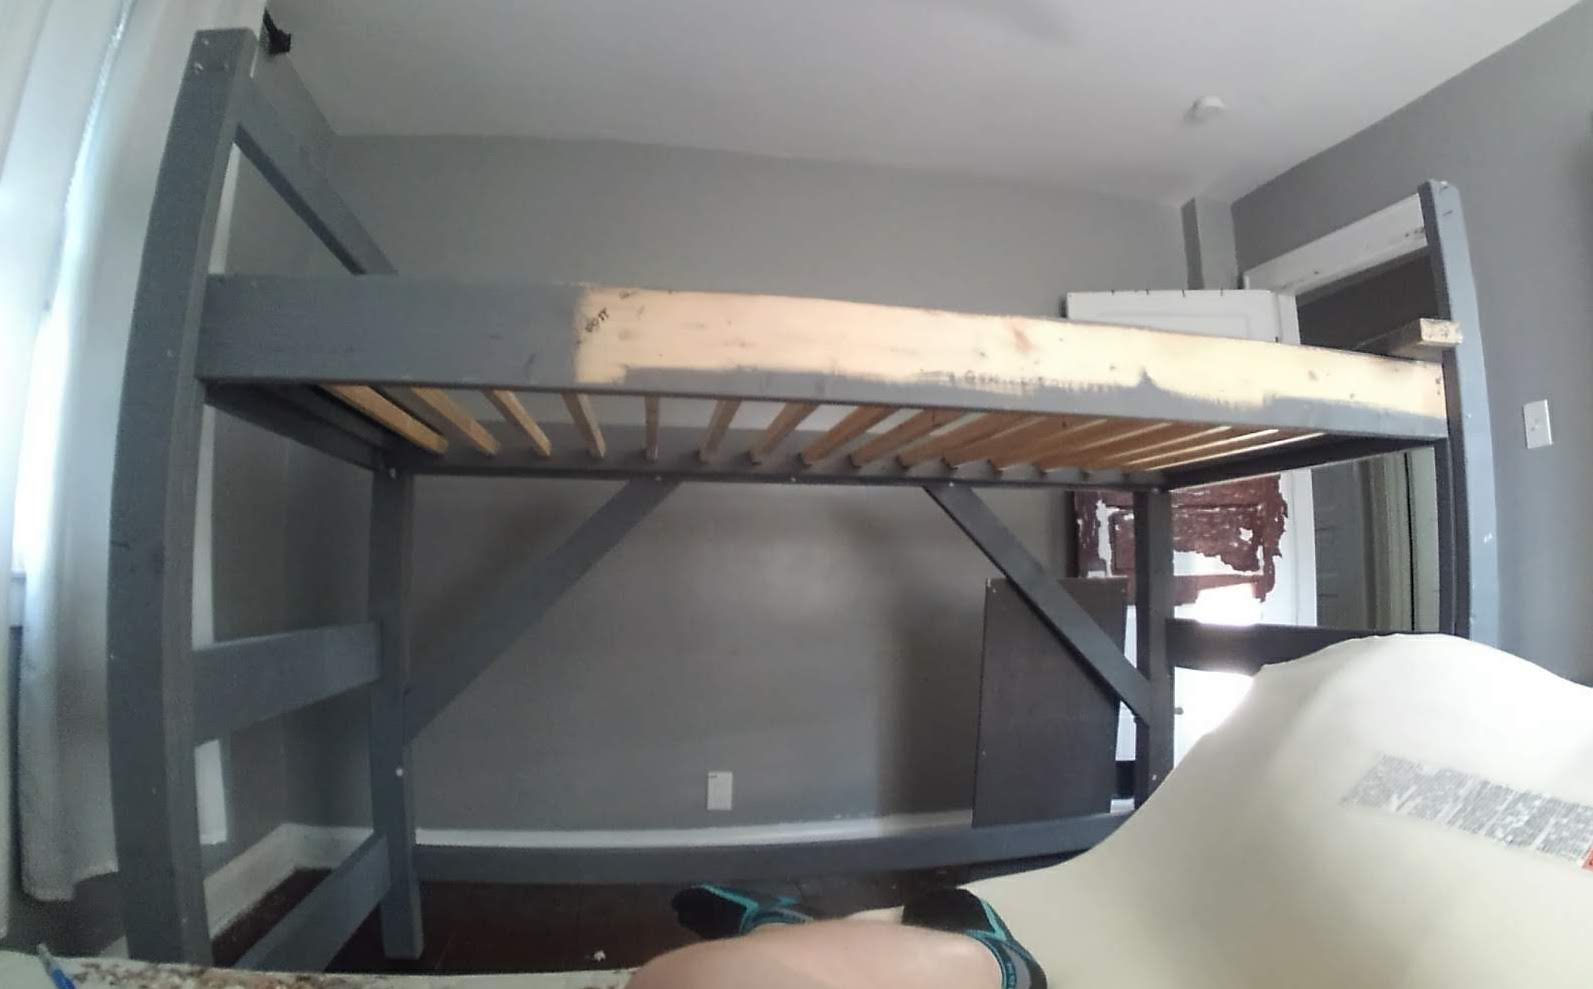 A lofted bed mid-way through construction